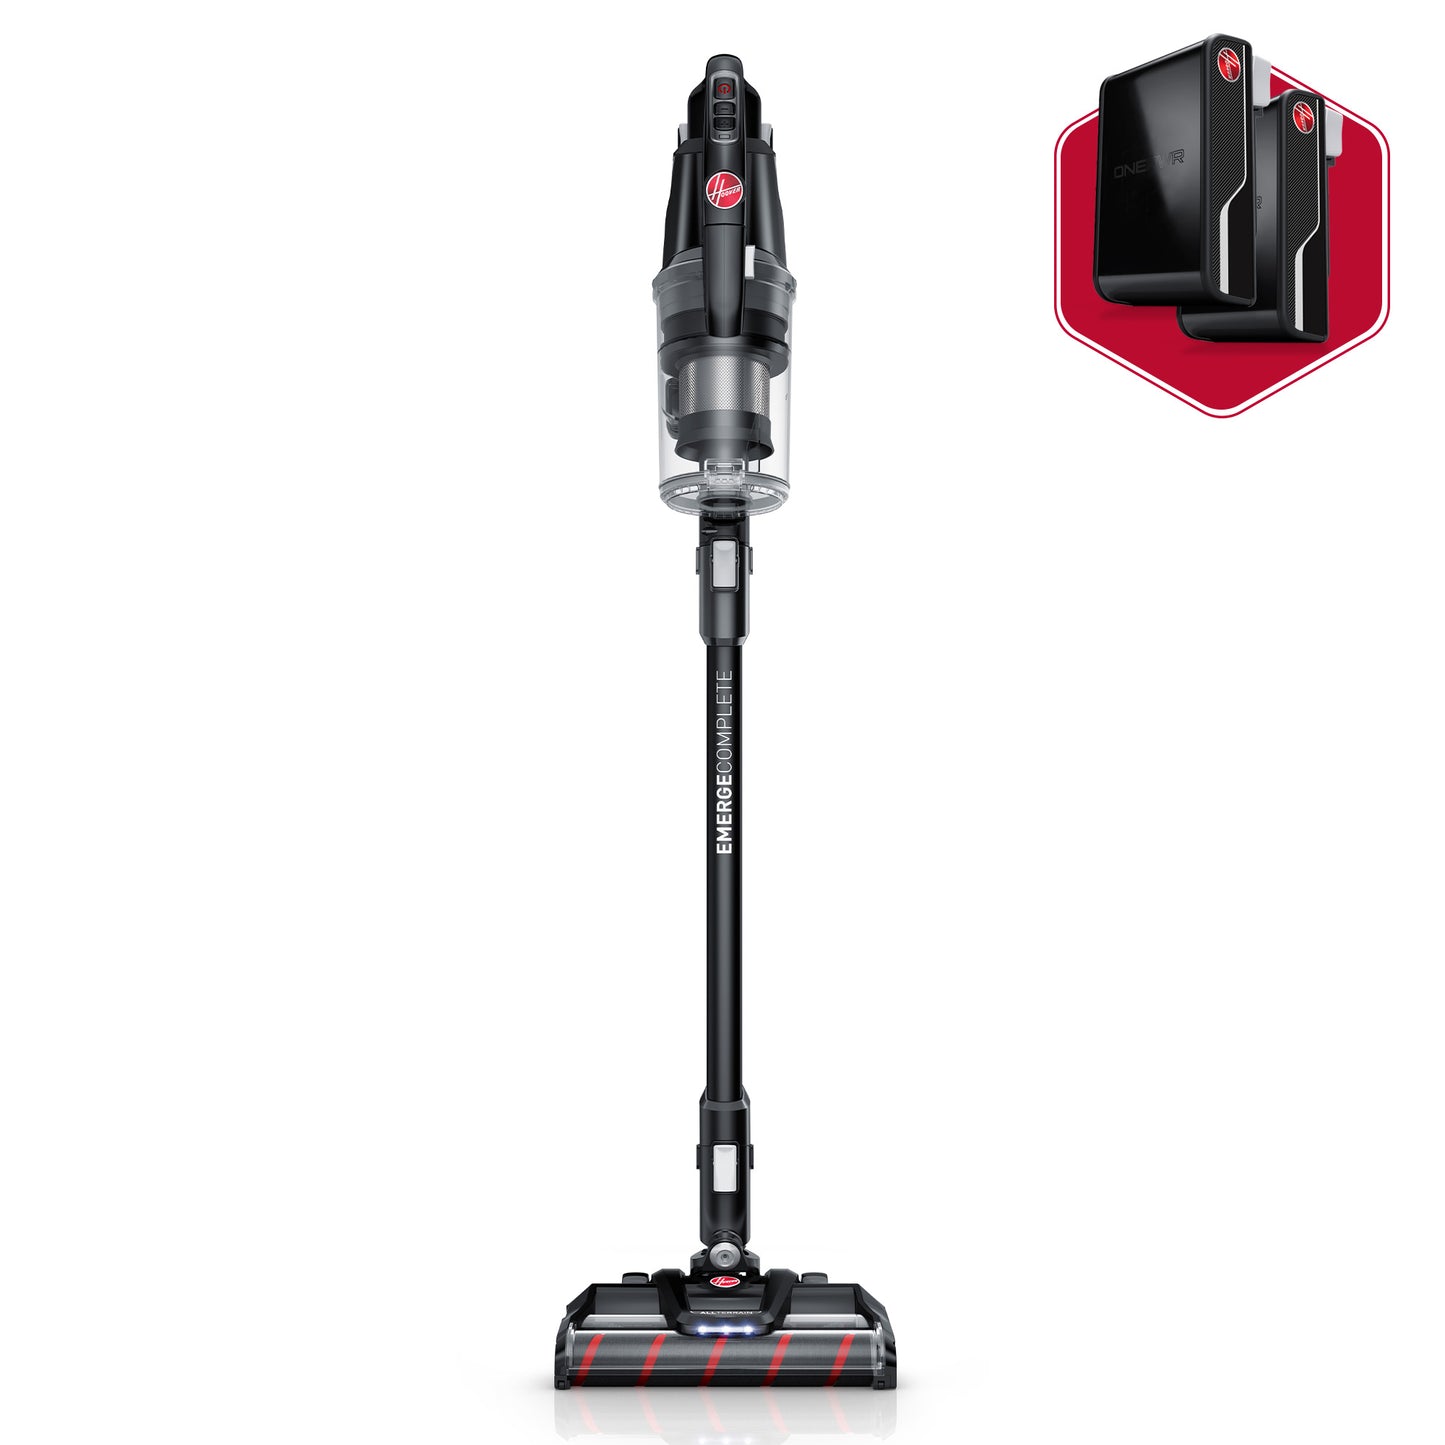 Hoover ONEPWR Emerge complet avec tour tout-terrain et ONEPWR